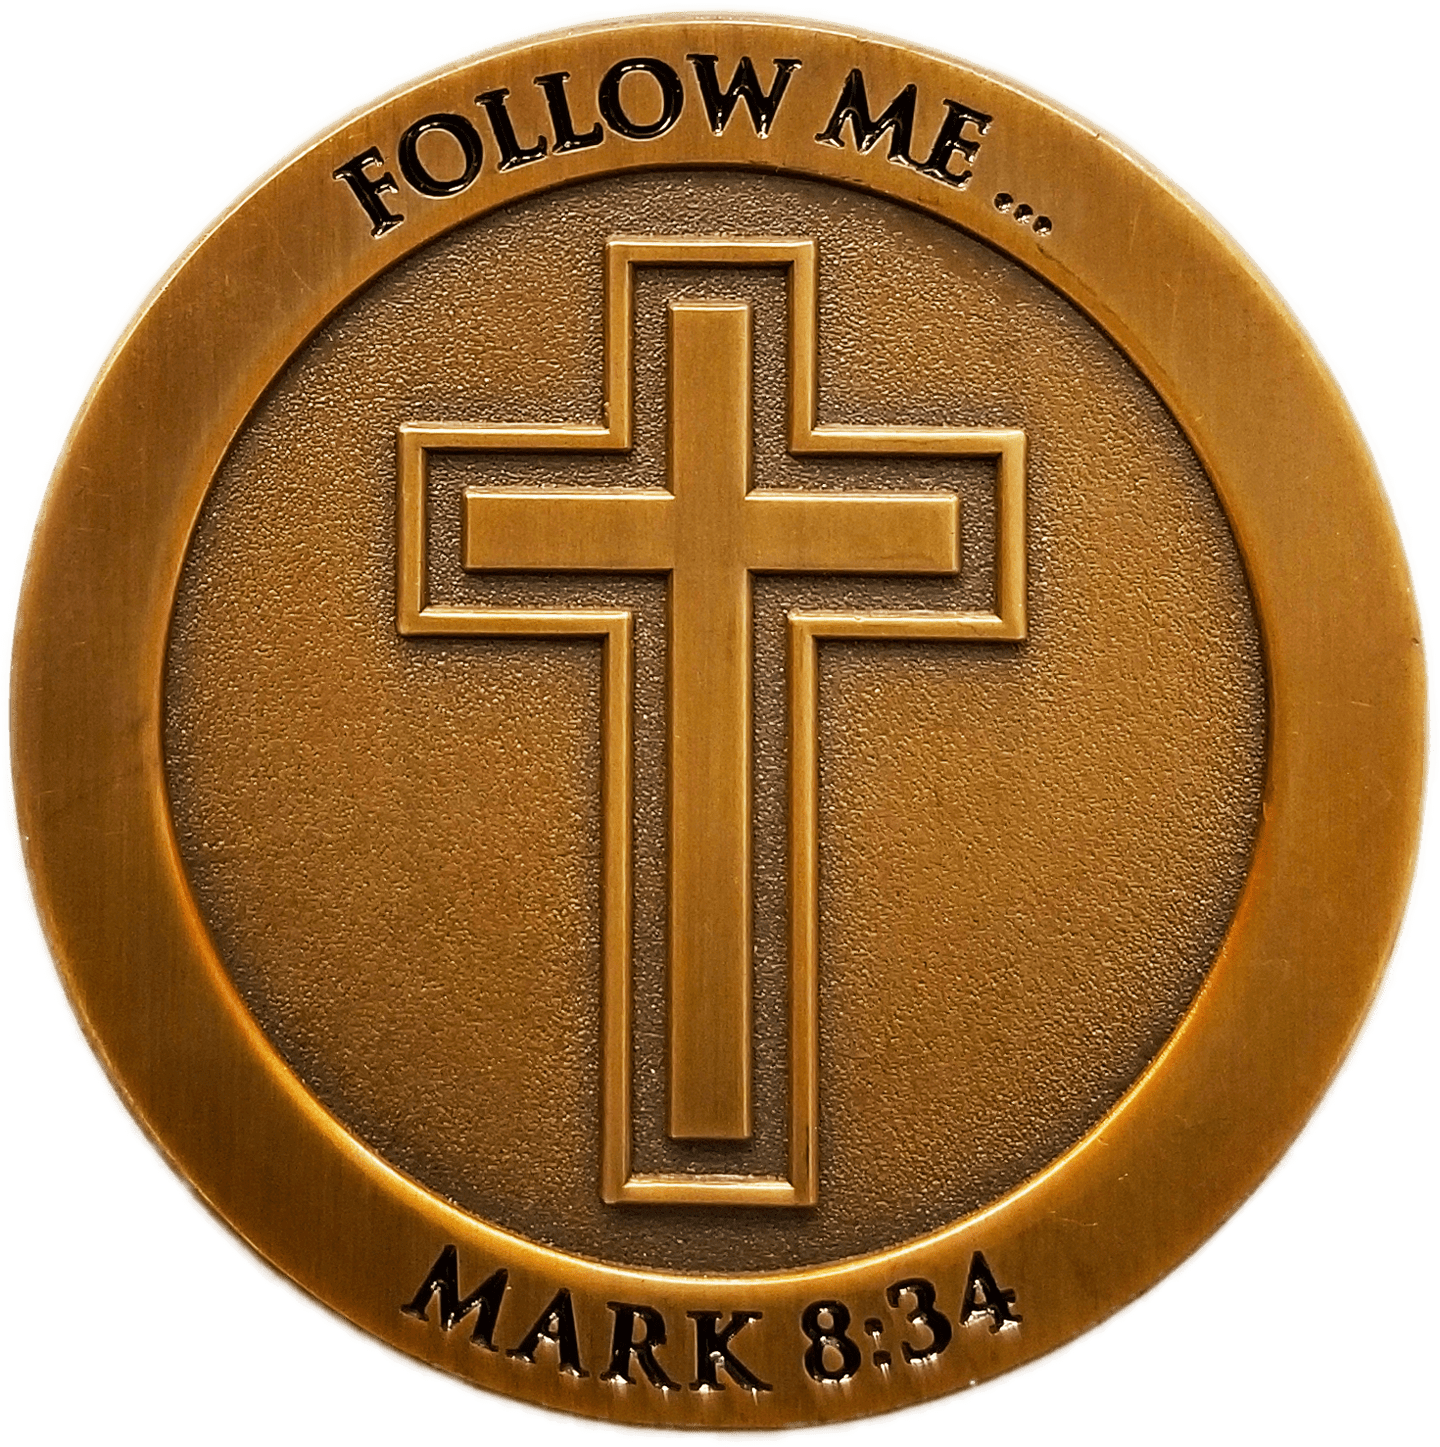 Front: Cross, with text, "Follow Me..." / "Mark 8:34"